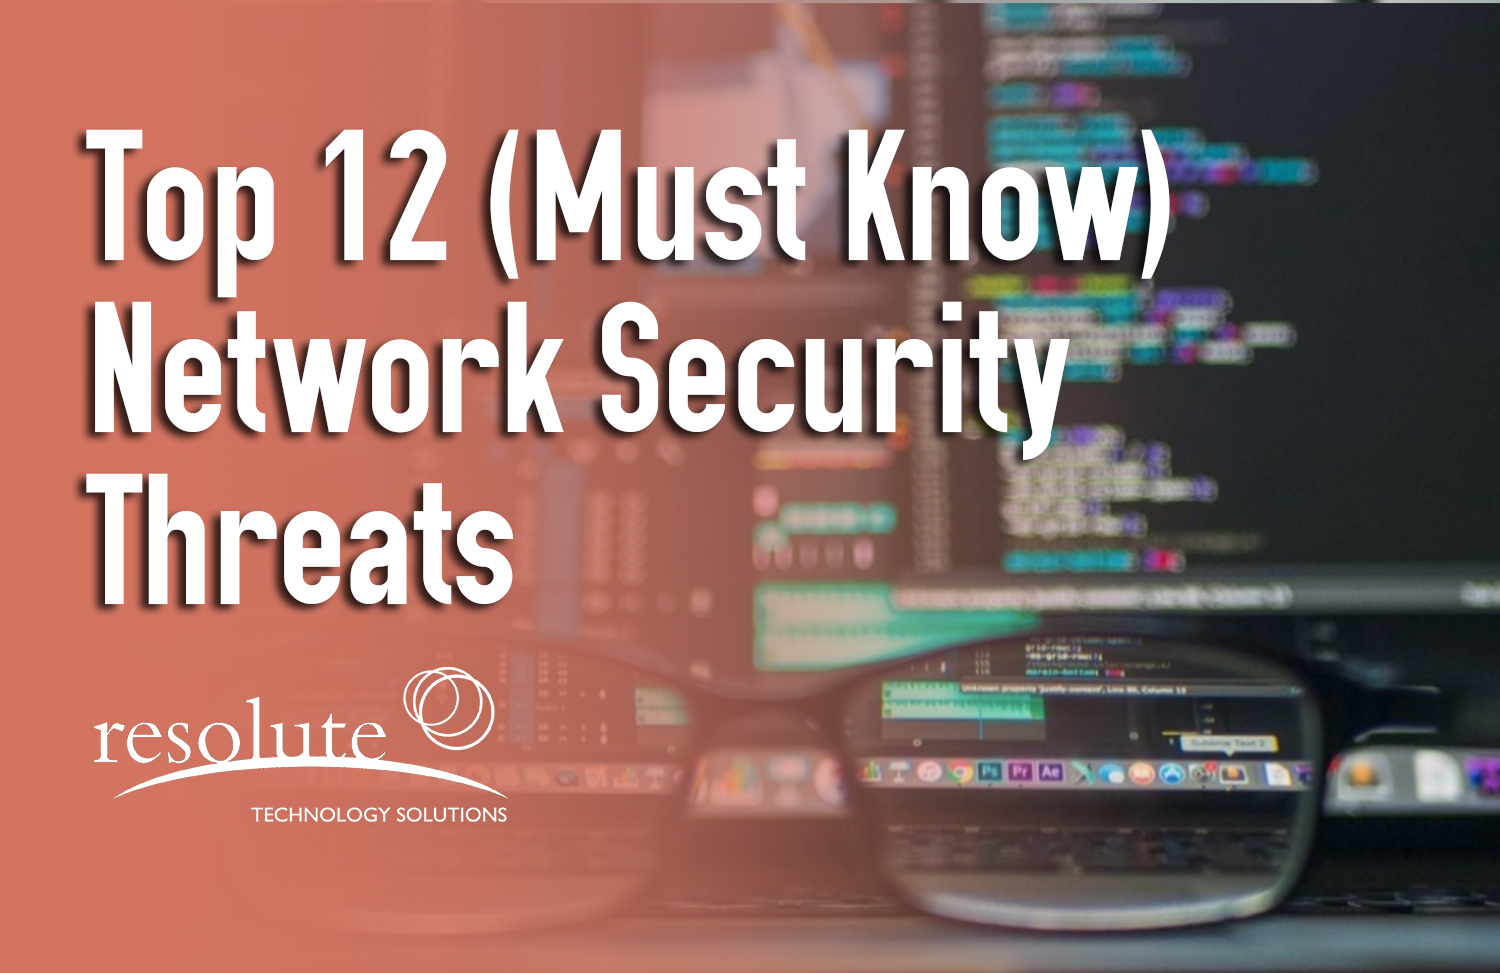 Top 12 (Must Know) Common Threats to Network Security